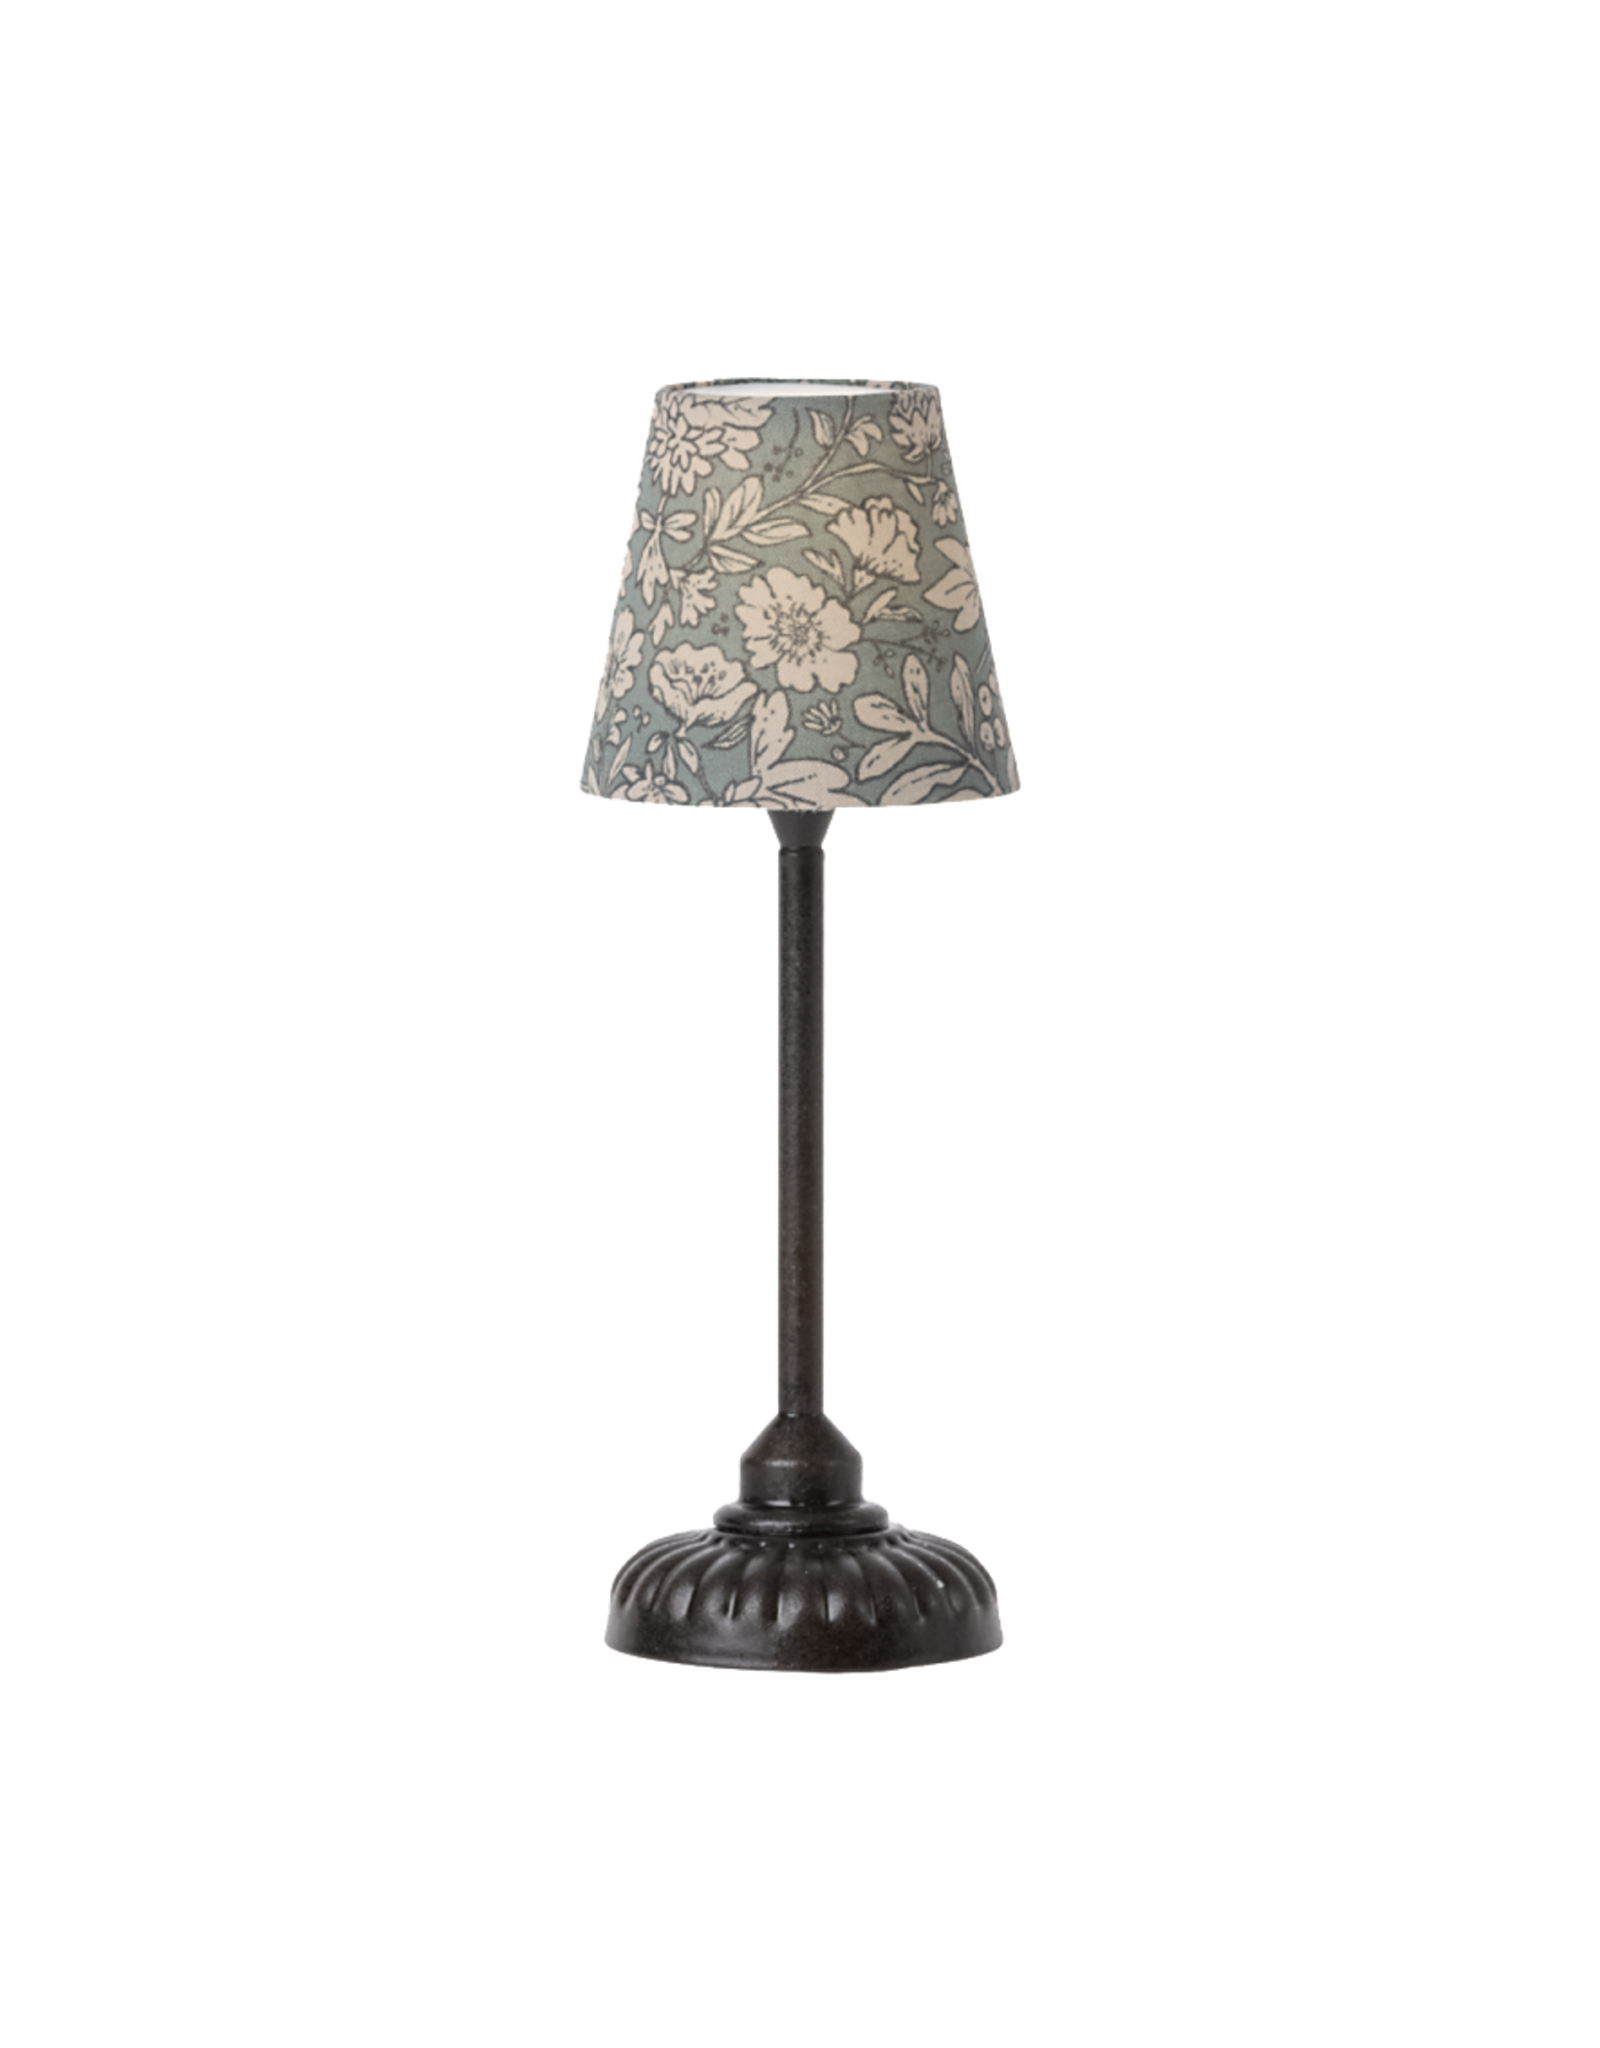 Maileg Small Vintage Floor Lamp - Anthracite